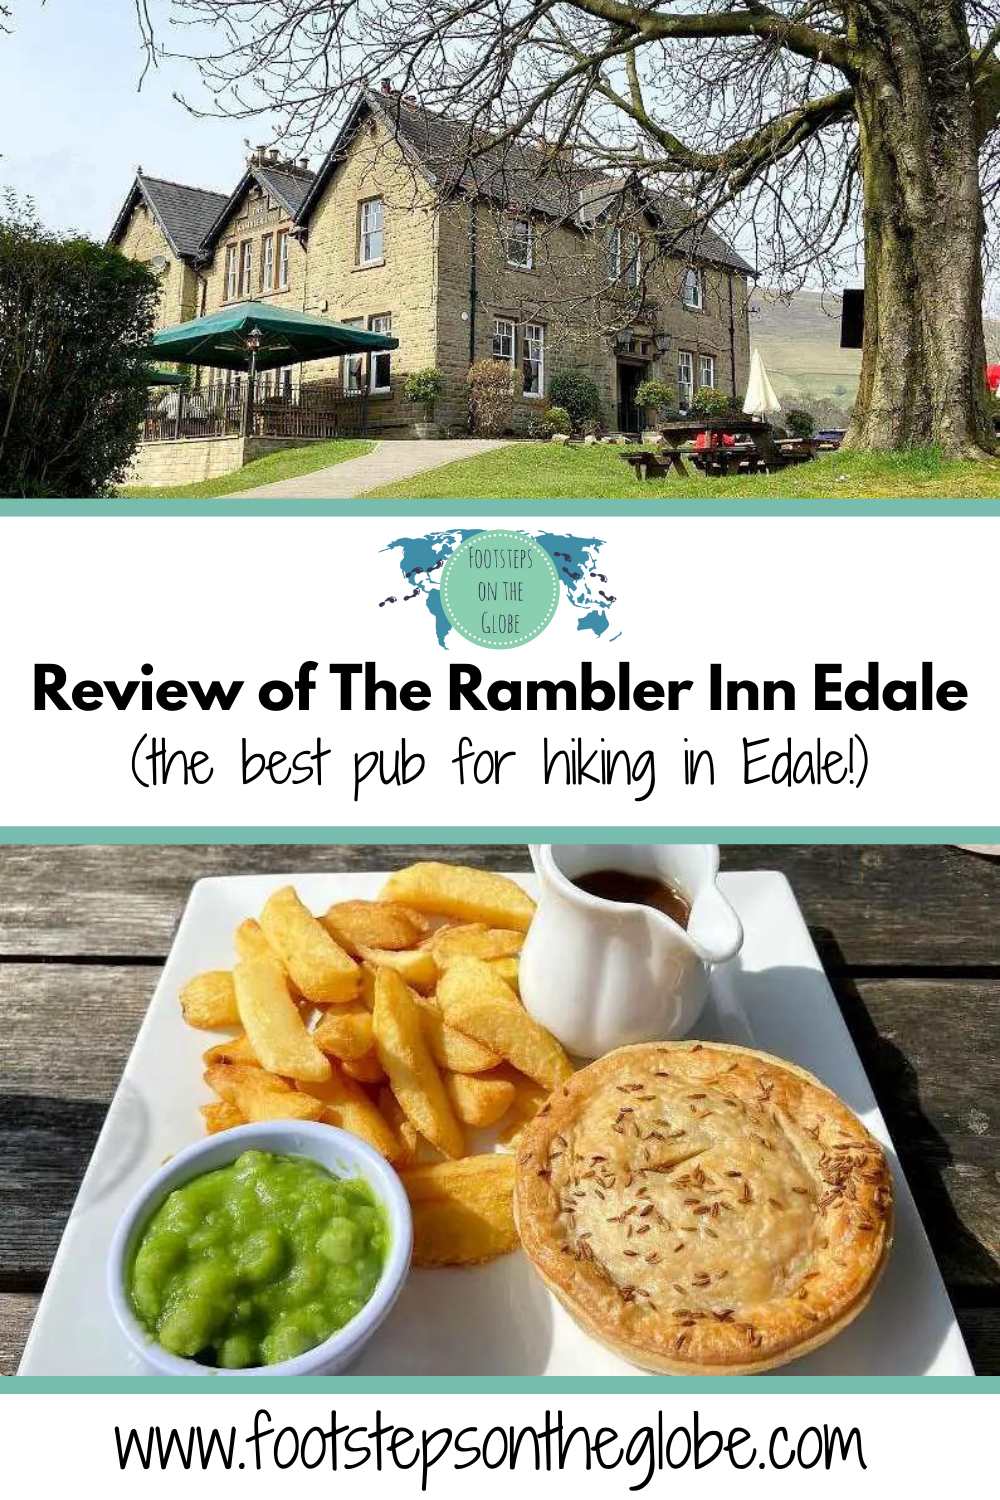 Pinterest image of the The Ranbler Inn Pub with a vegan pie meal with mushy peas with the text "Review of The Rambler Inn Edale (the best pub for hiking in Edale!)"